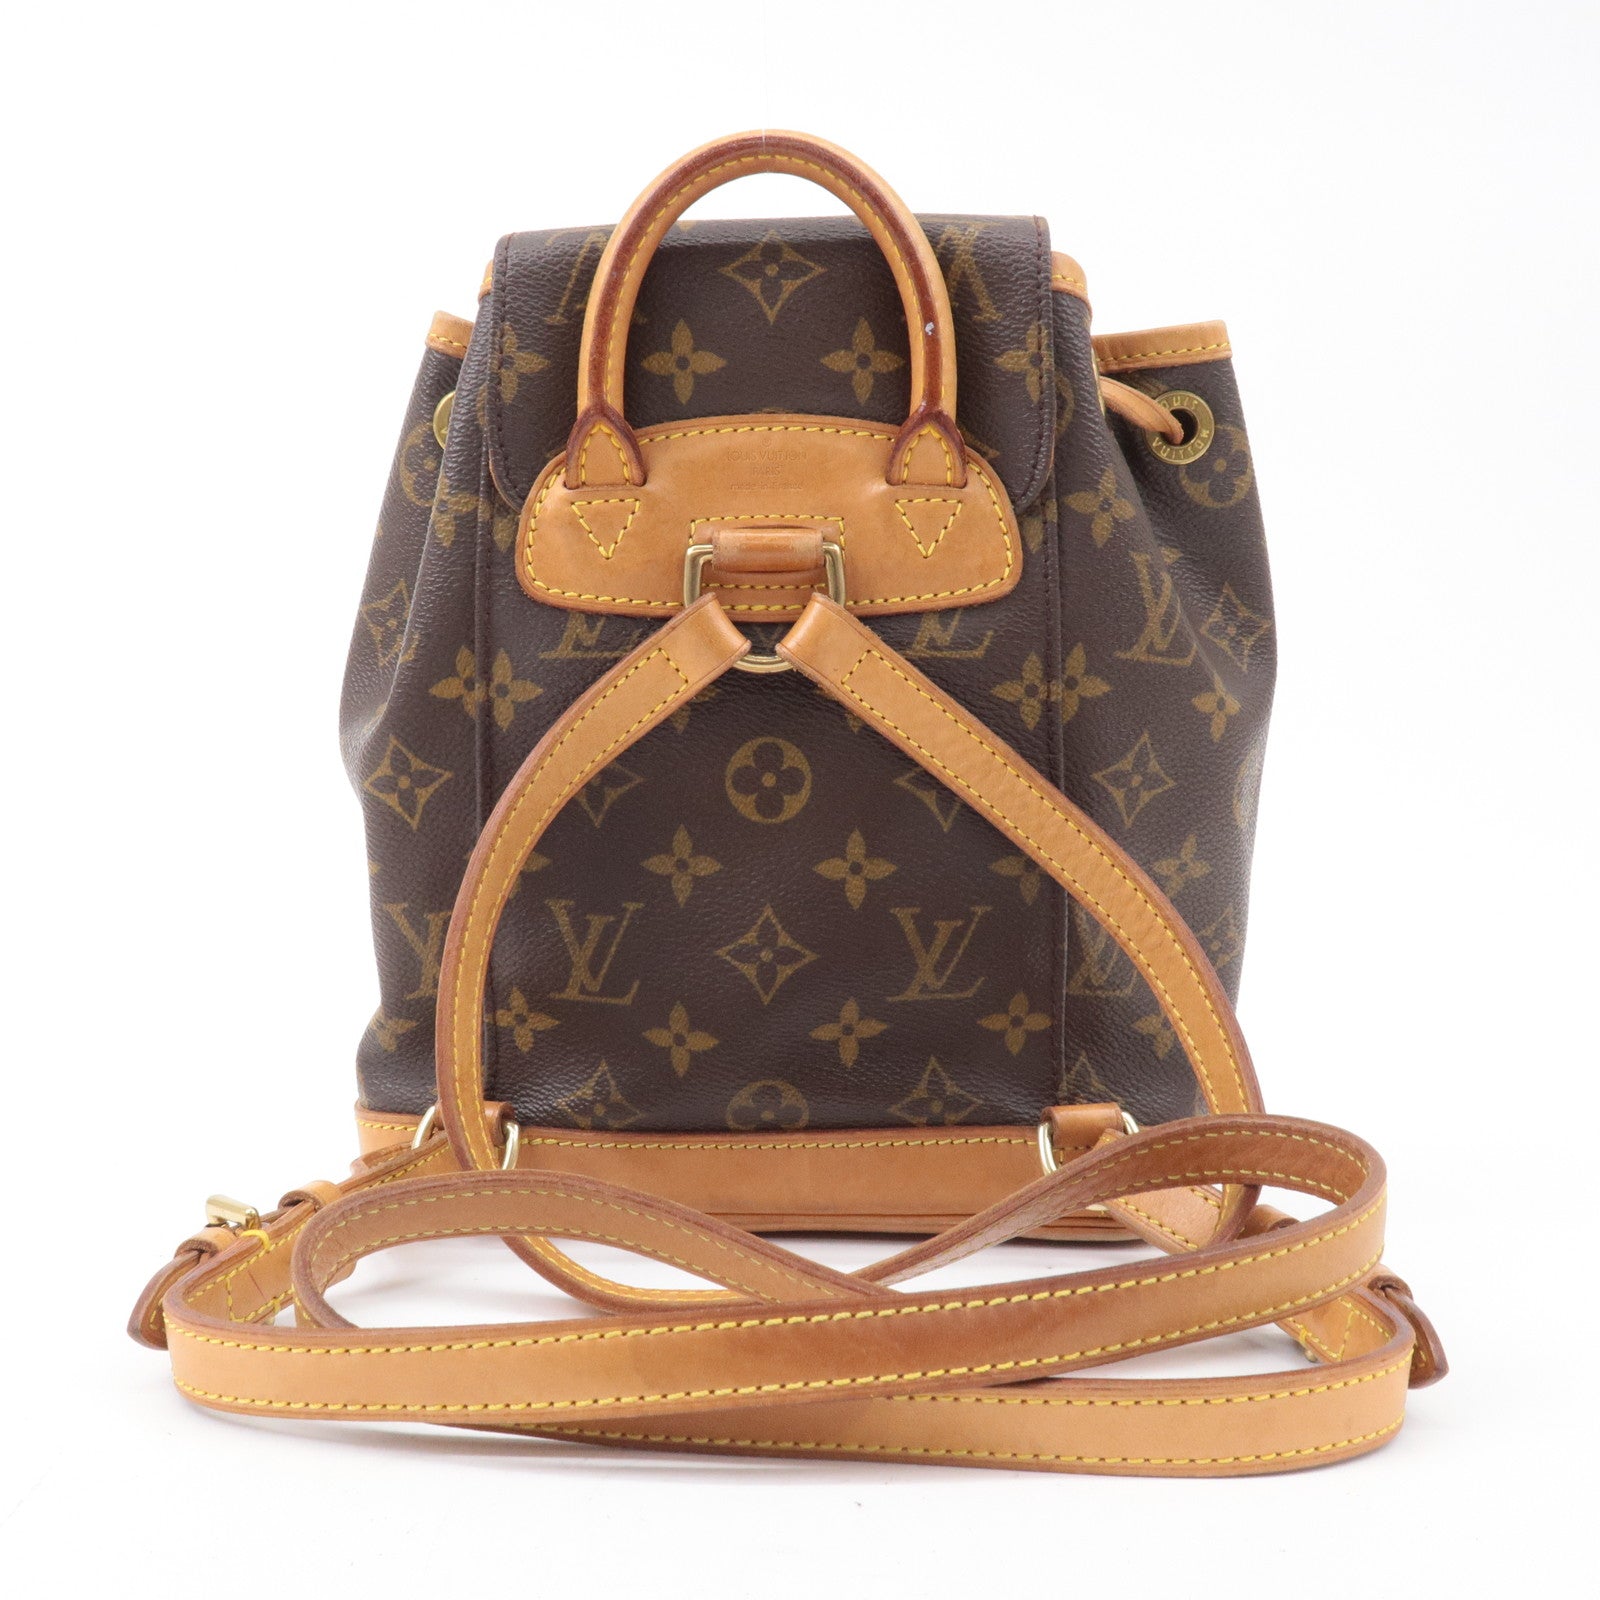 Nice Mini or Nice Nano? I can't decide on which one I want. : r/Louisvuitton